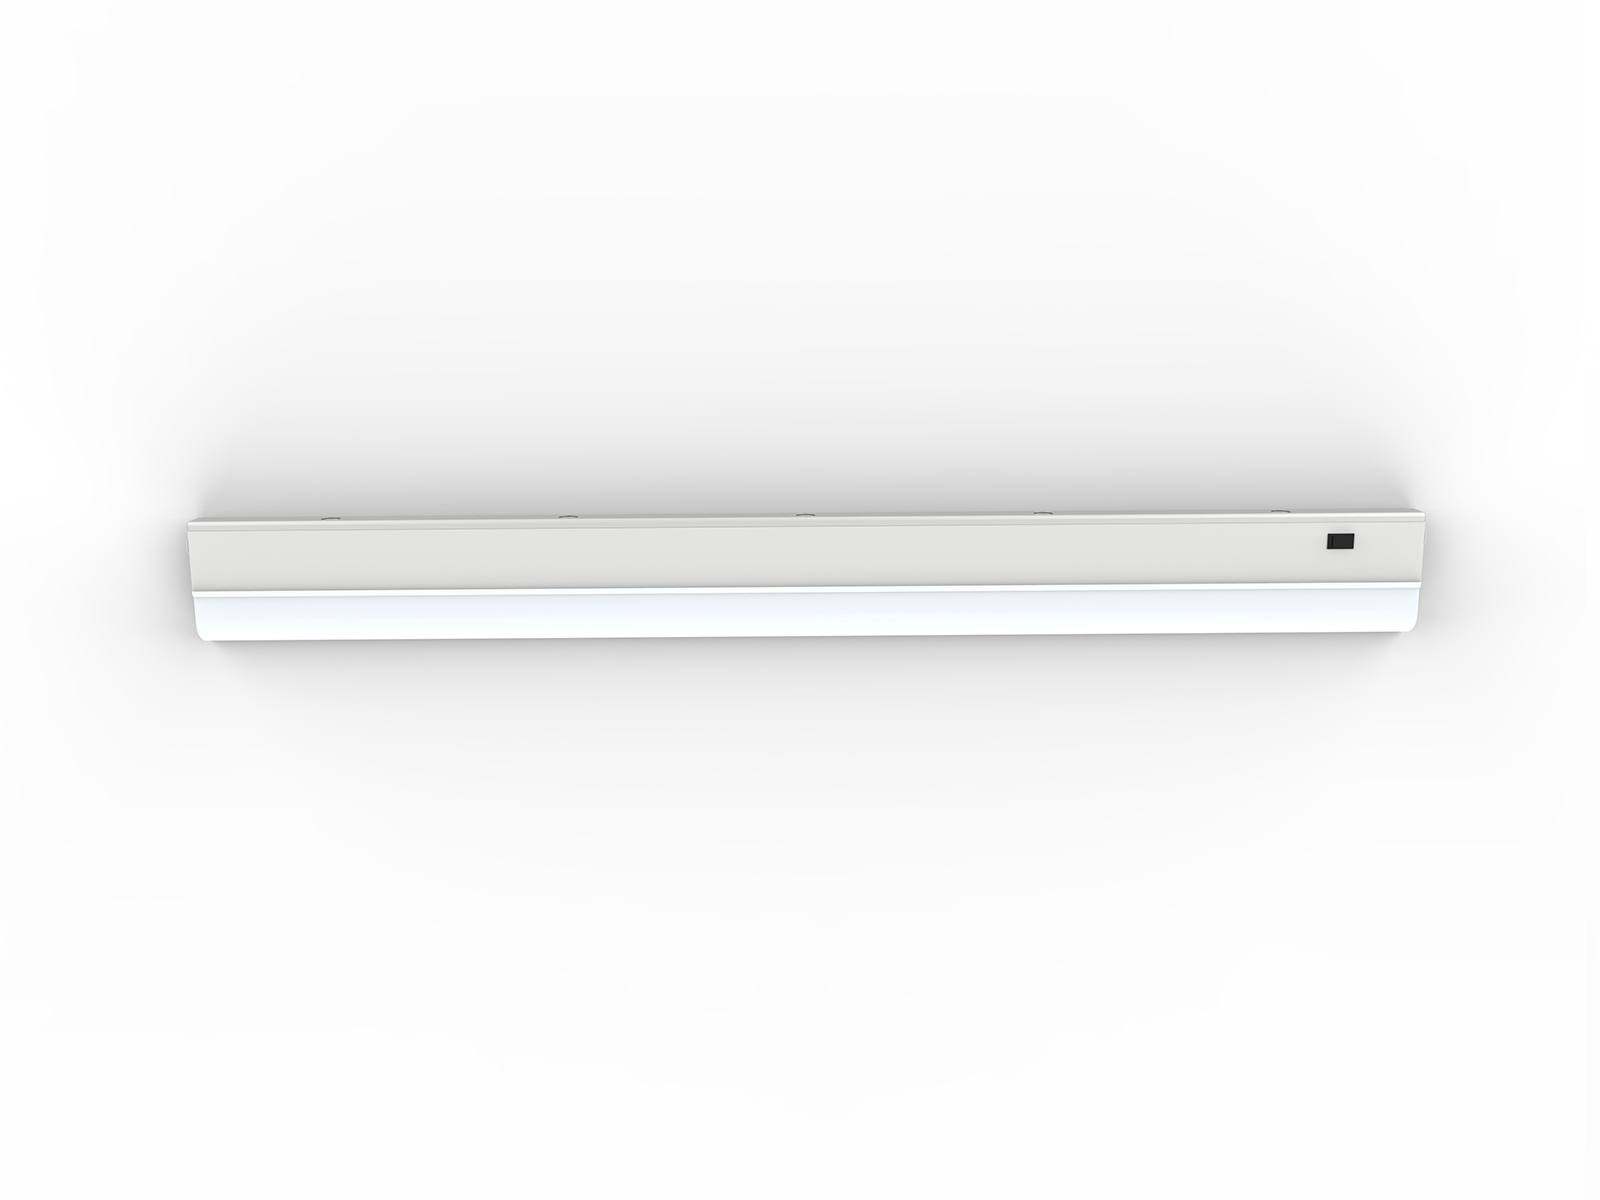 ultra thin led under cabinet light fixtures